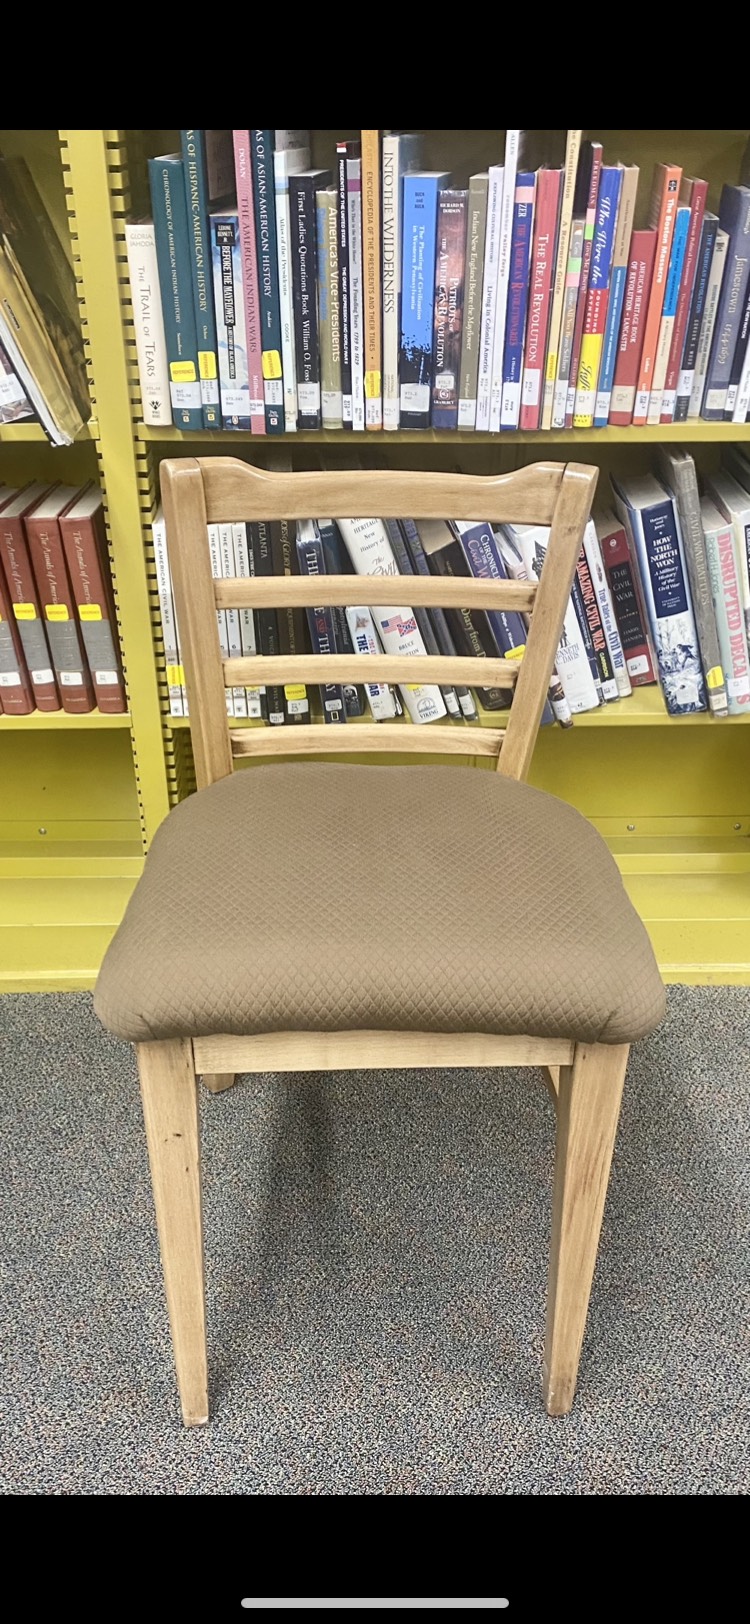 Chair to be auctioned